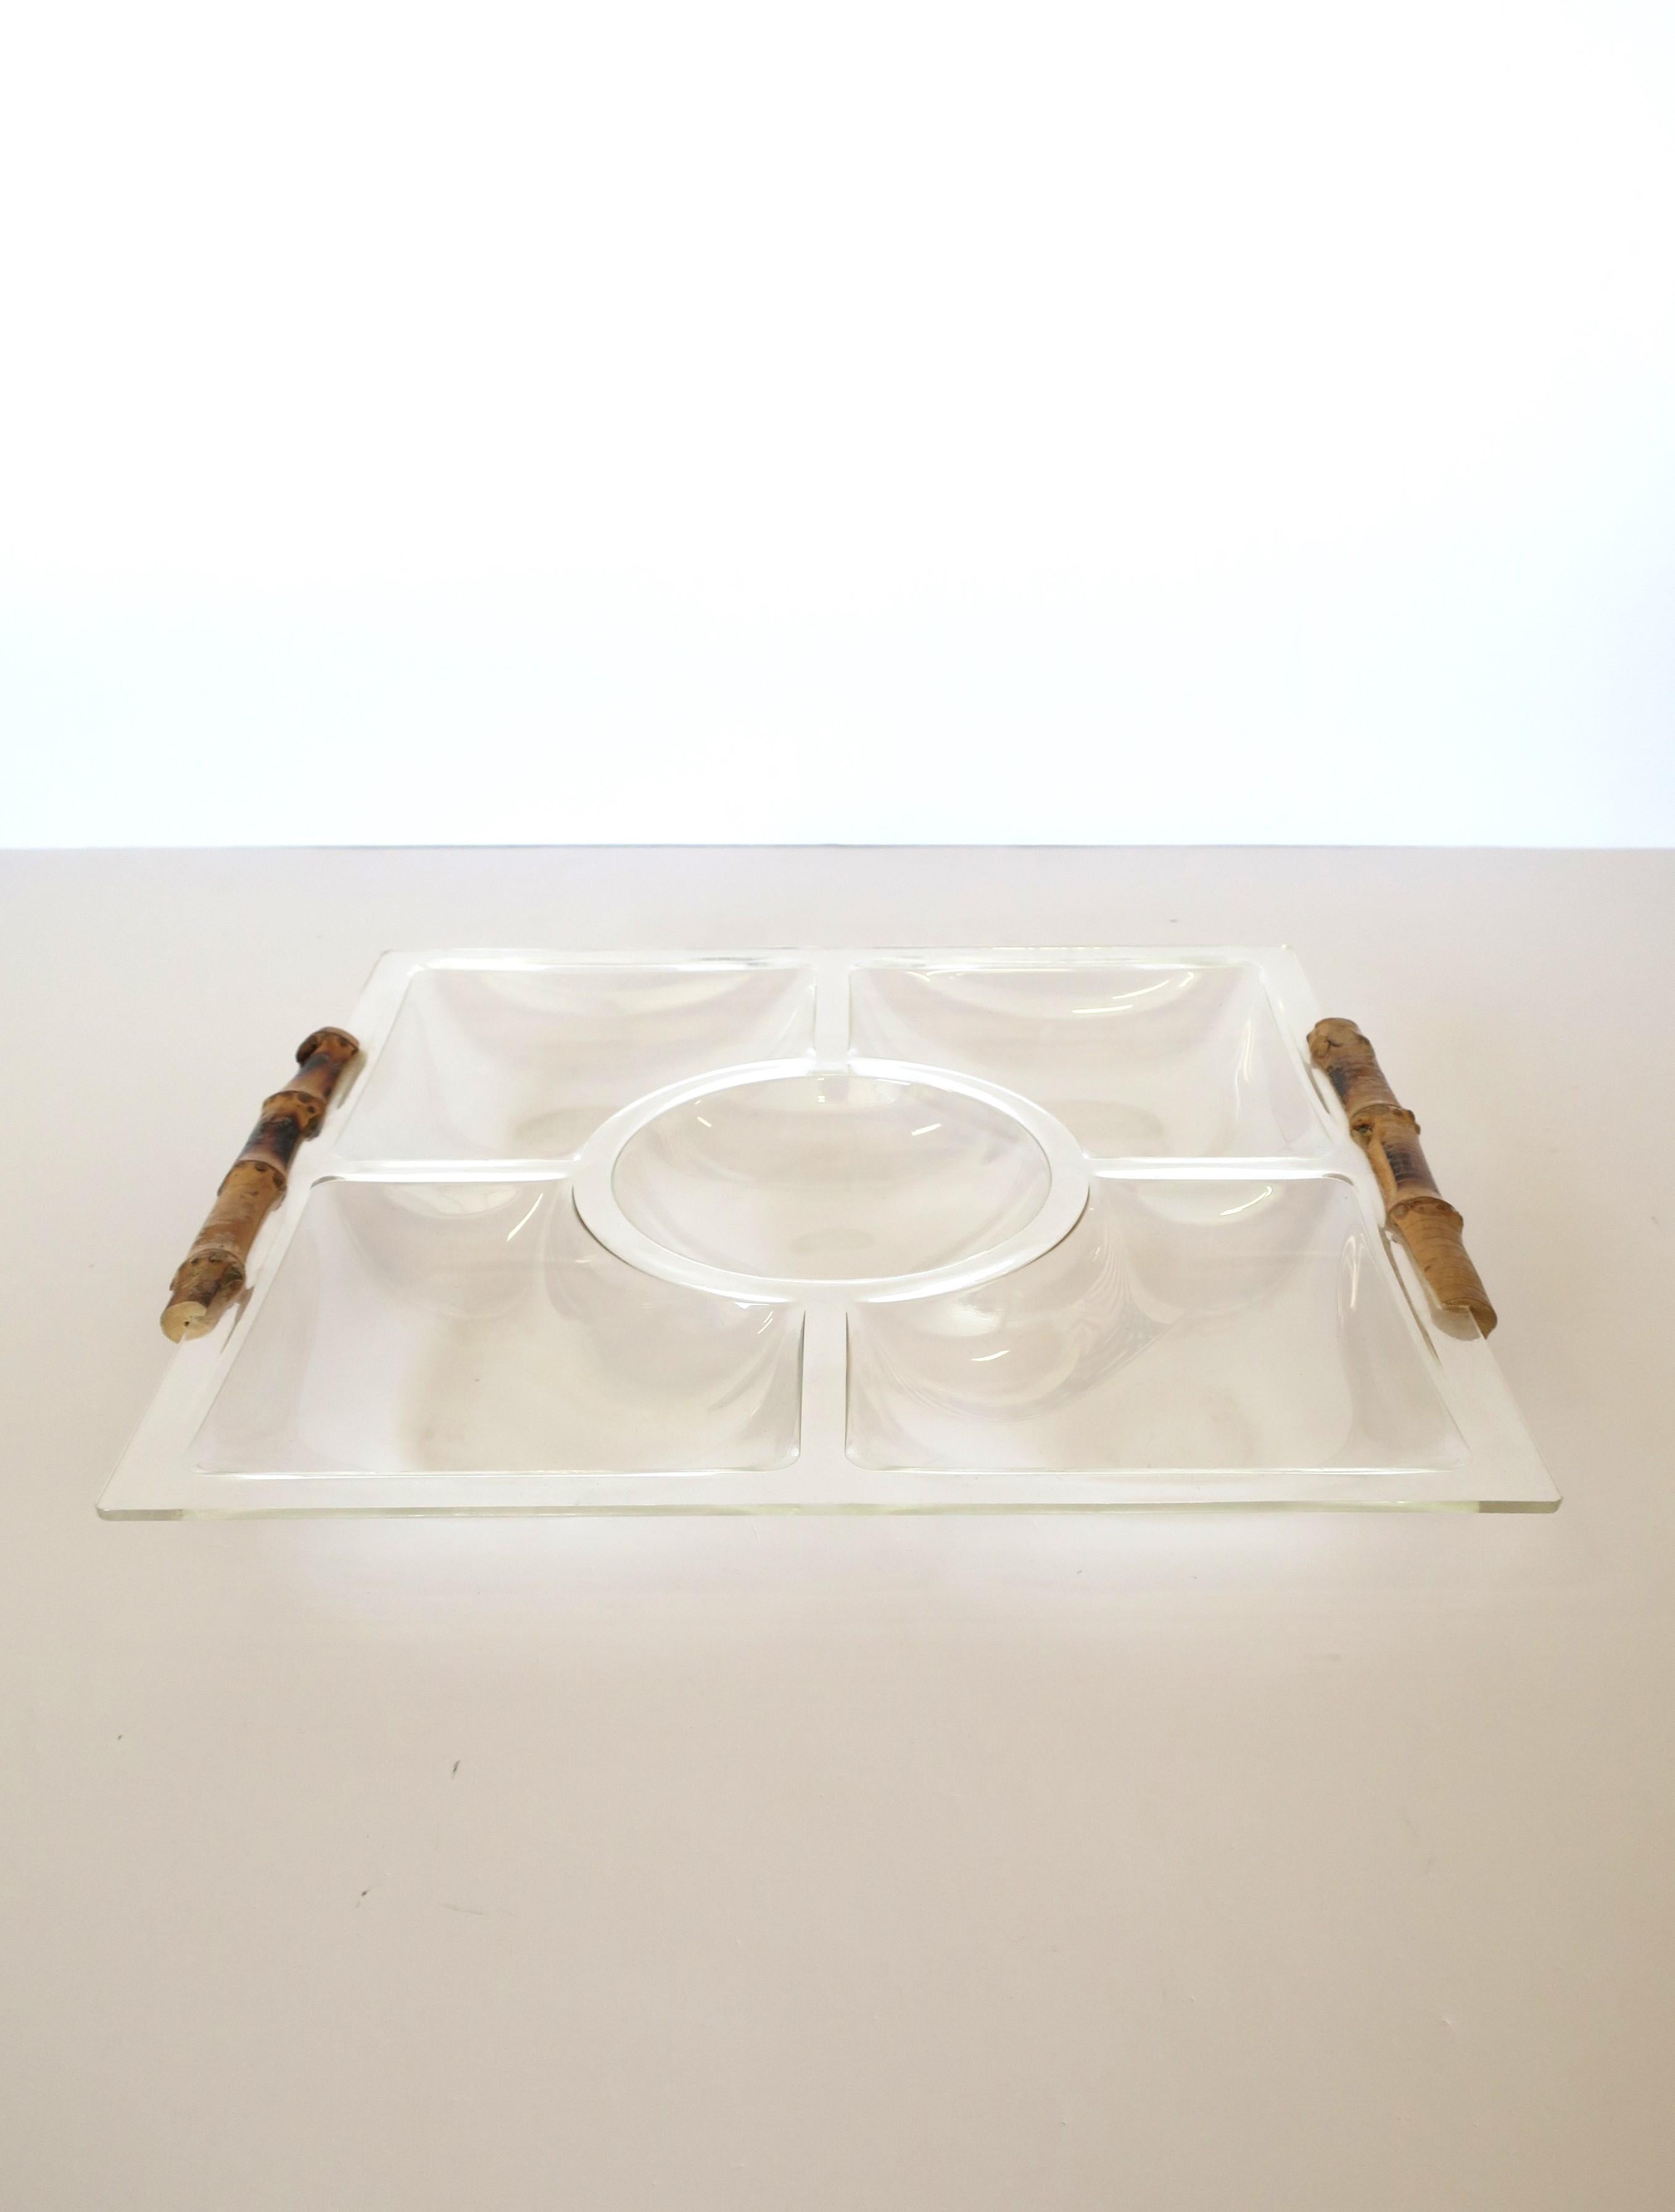 Chinoiserie Bamboo and Acrylic Sectional Serving Tray Bowl the Style of Gucci, 1977